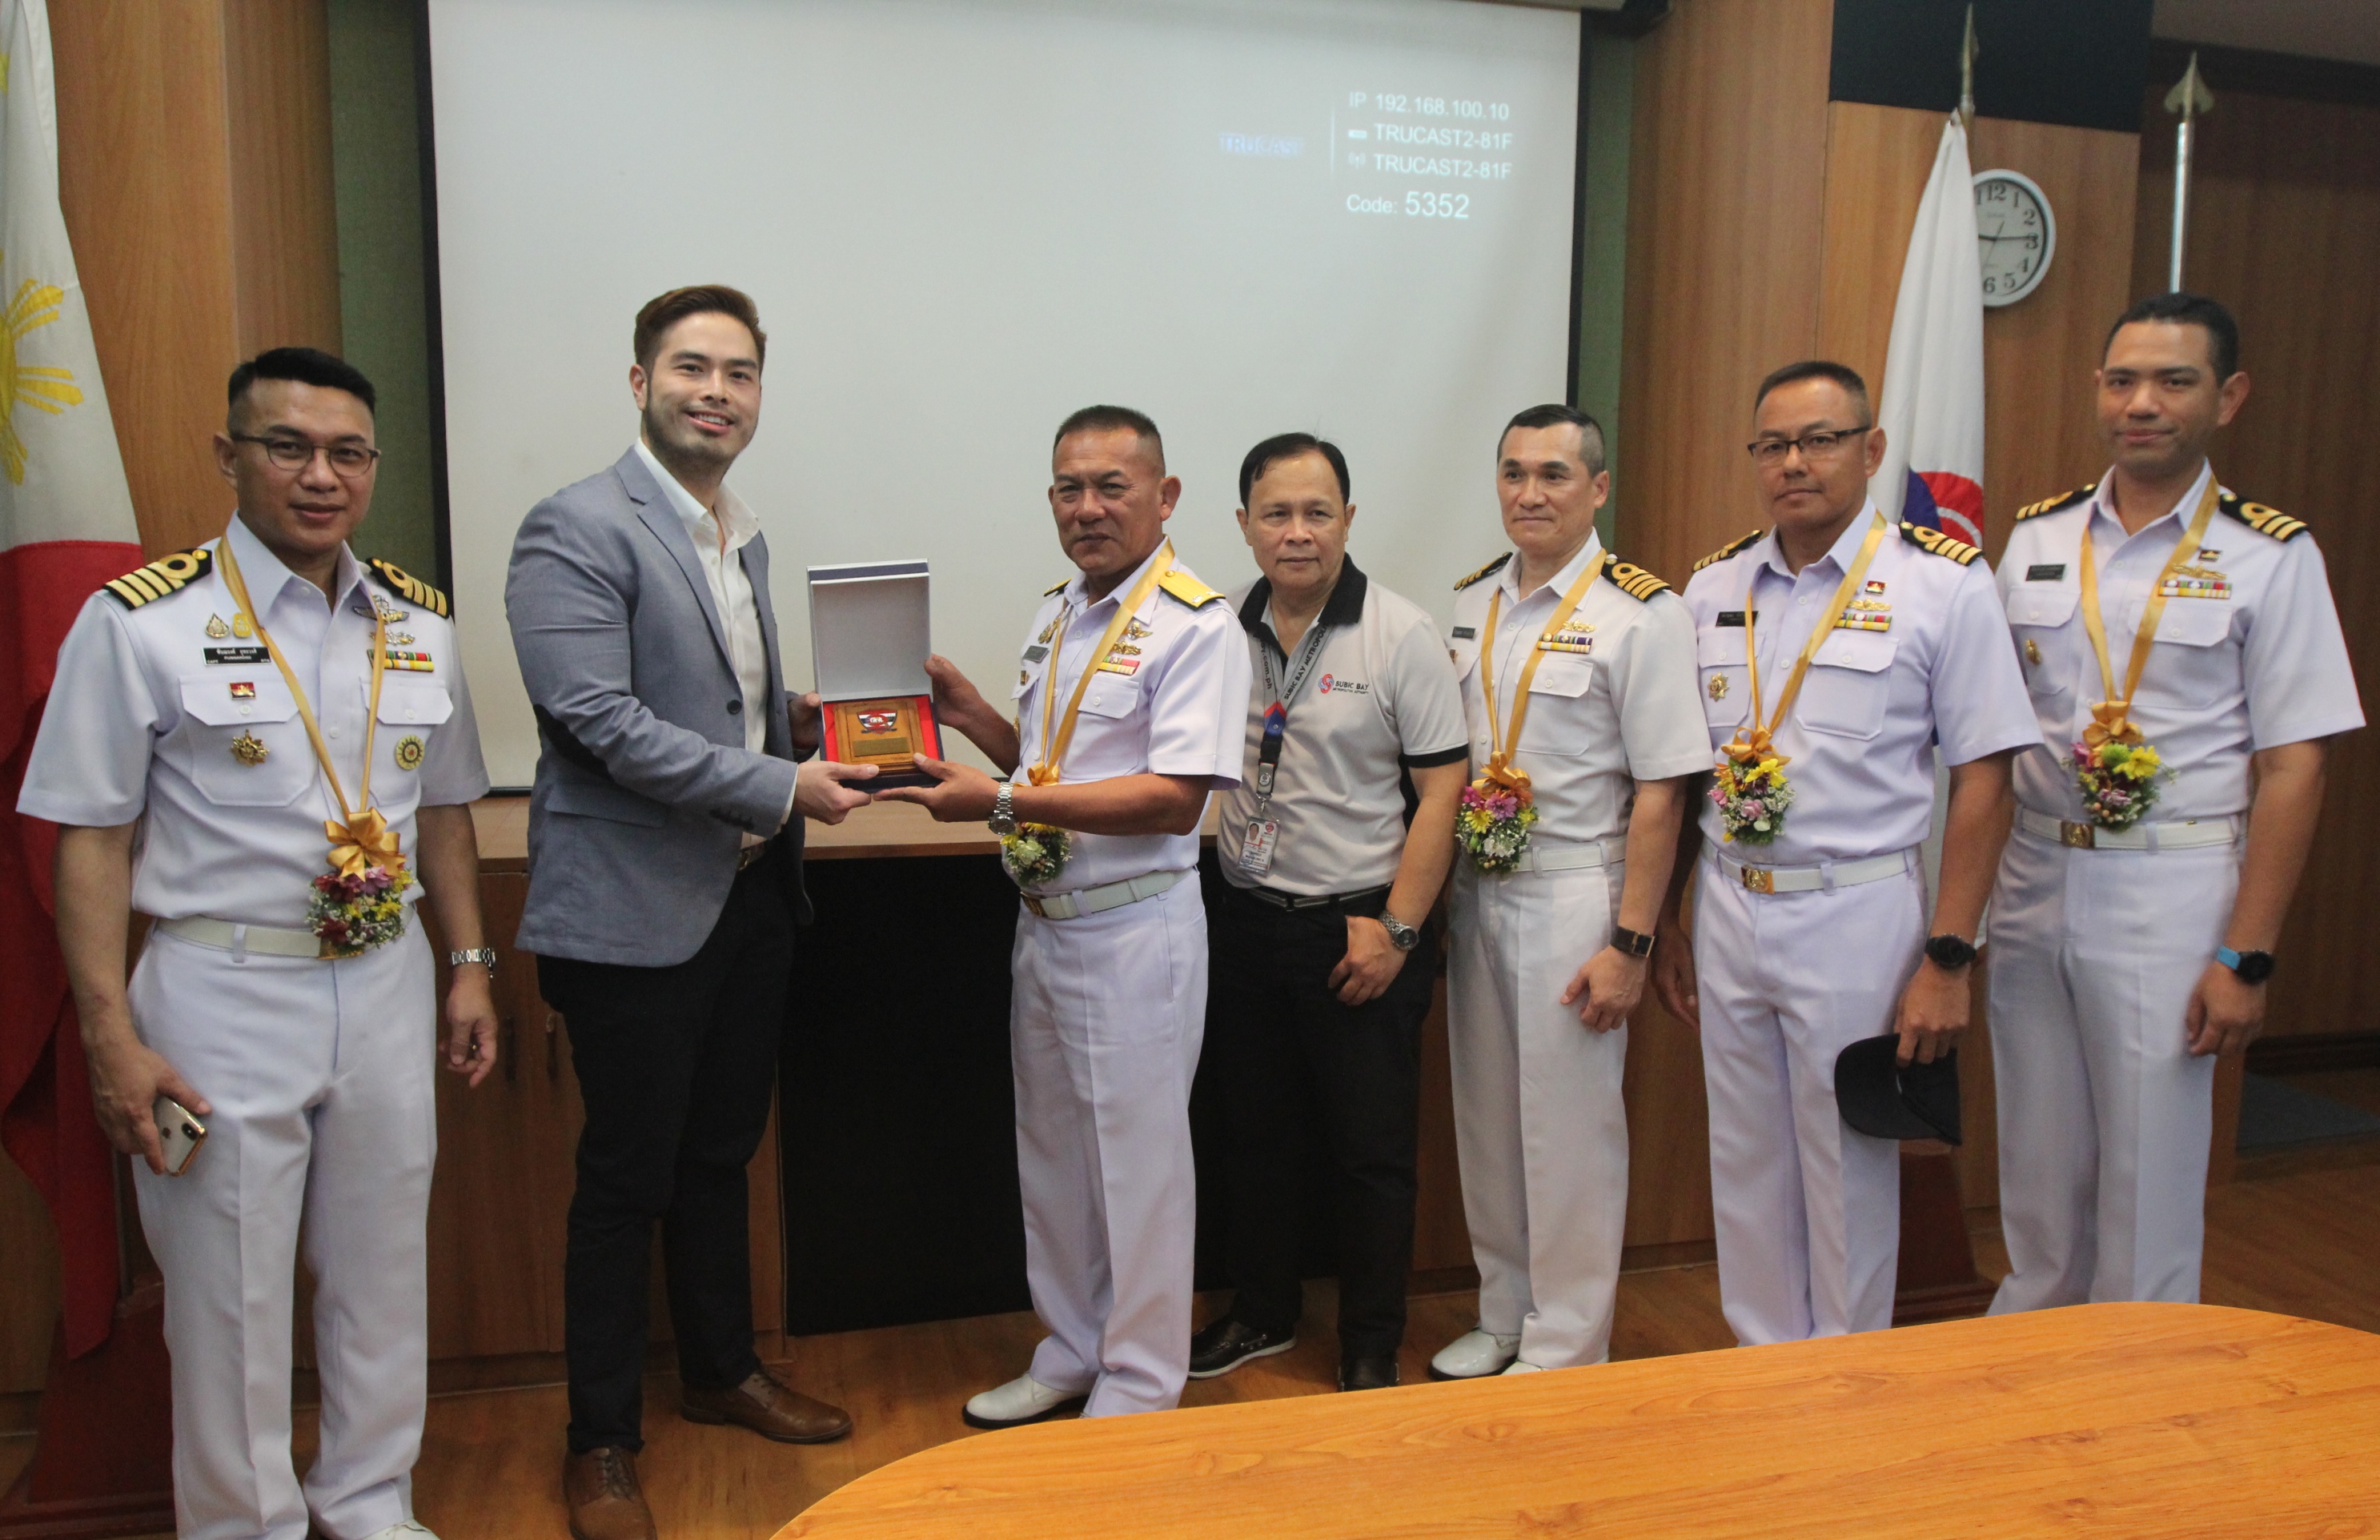 Officials of the Royal Thai Naval Cadet Training unit headed by Rear Admiral SompongÂ Â Pooniang and Commander Archarigaruth Noichinda presents a ship memento to SBMA Senior Deputy Administrators Renato Lee III and Mar SanquiÂ during a courtesy call at the Subic Bay Freeport on Thursday. The Royal Thai Navyâ€™s frigate HTMS Taksin (FFG-422) and offshore patrol vessel HTMS Krabi (OPV-551) arrived in Subic on Wednesday for a goodwill visit in the Philippines until Saturday.